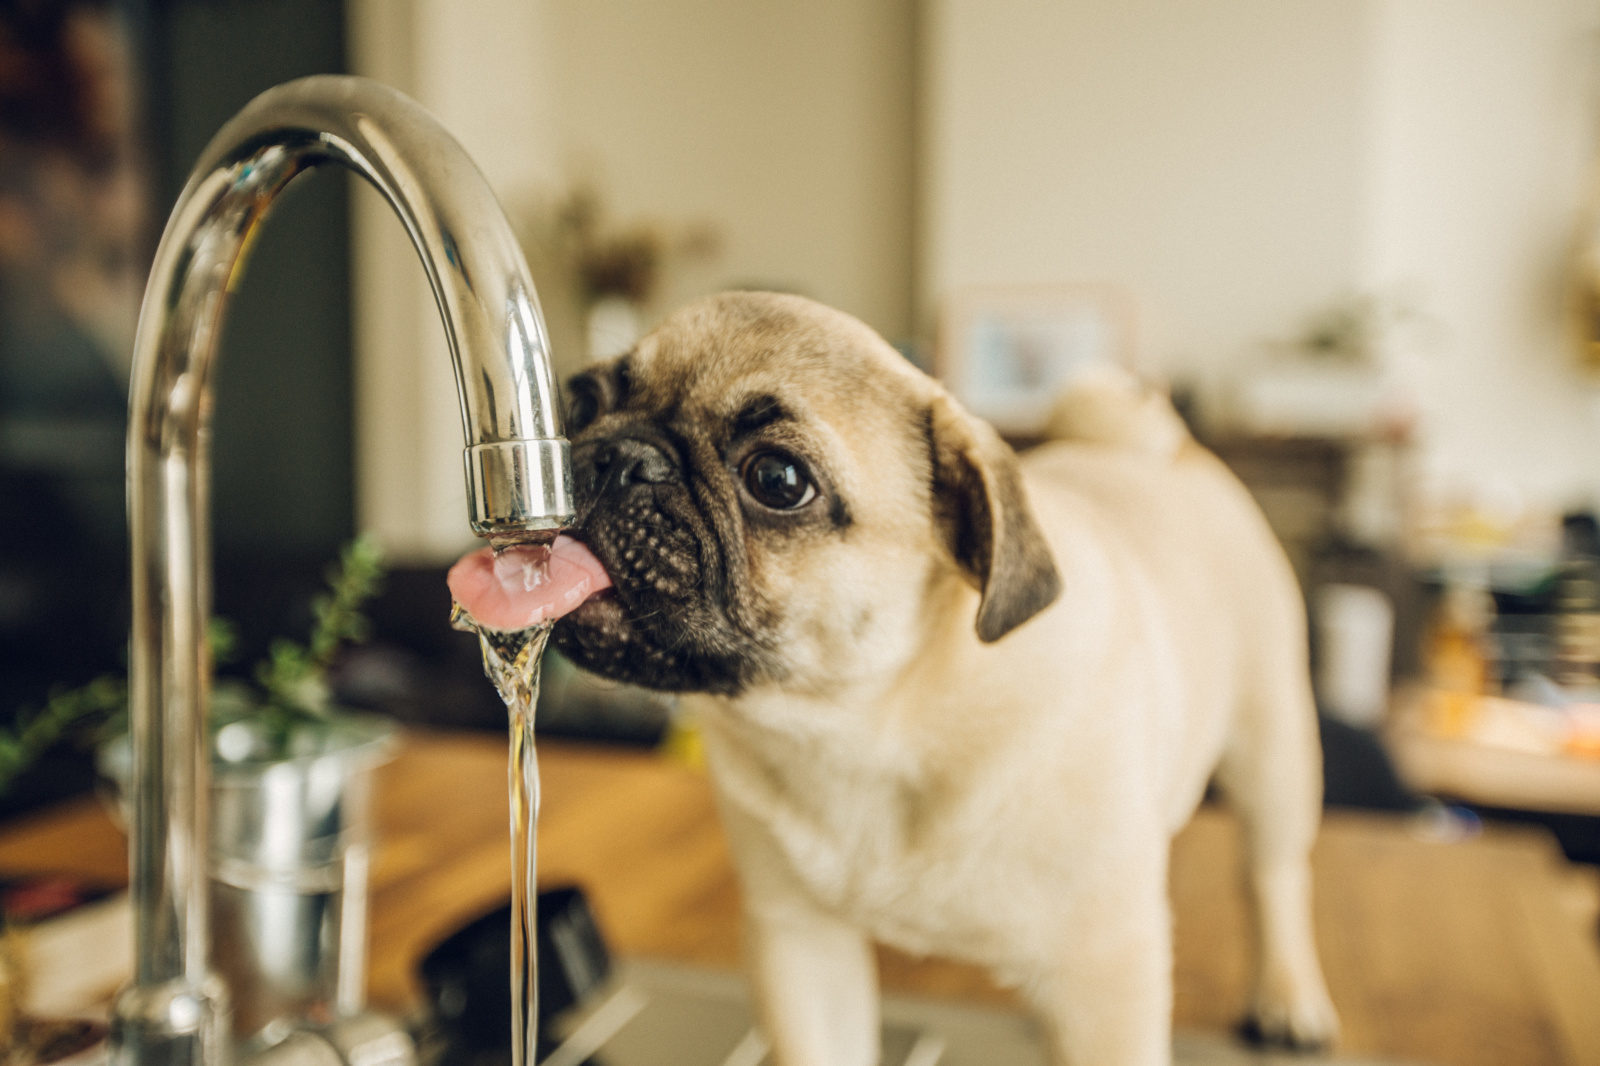 Can dogs drink well water from tap water?